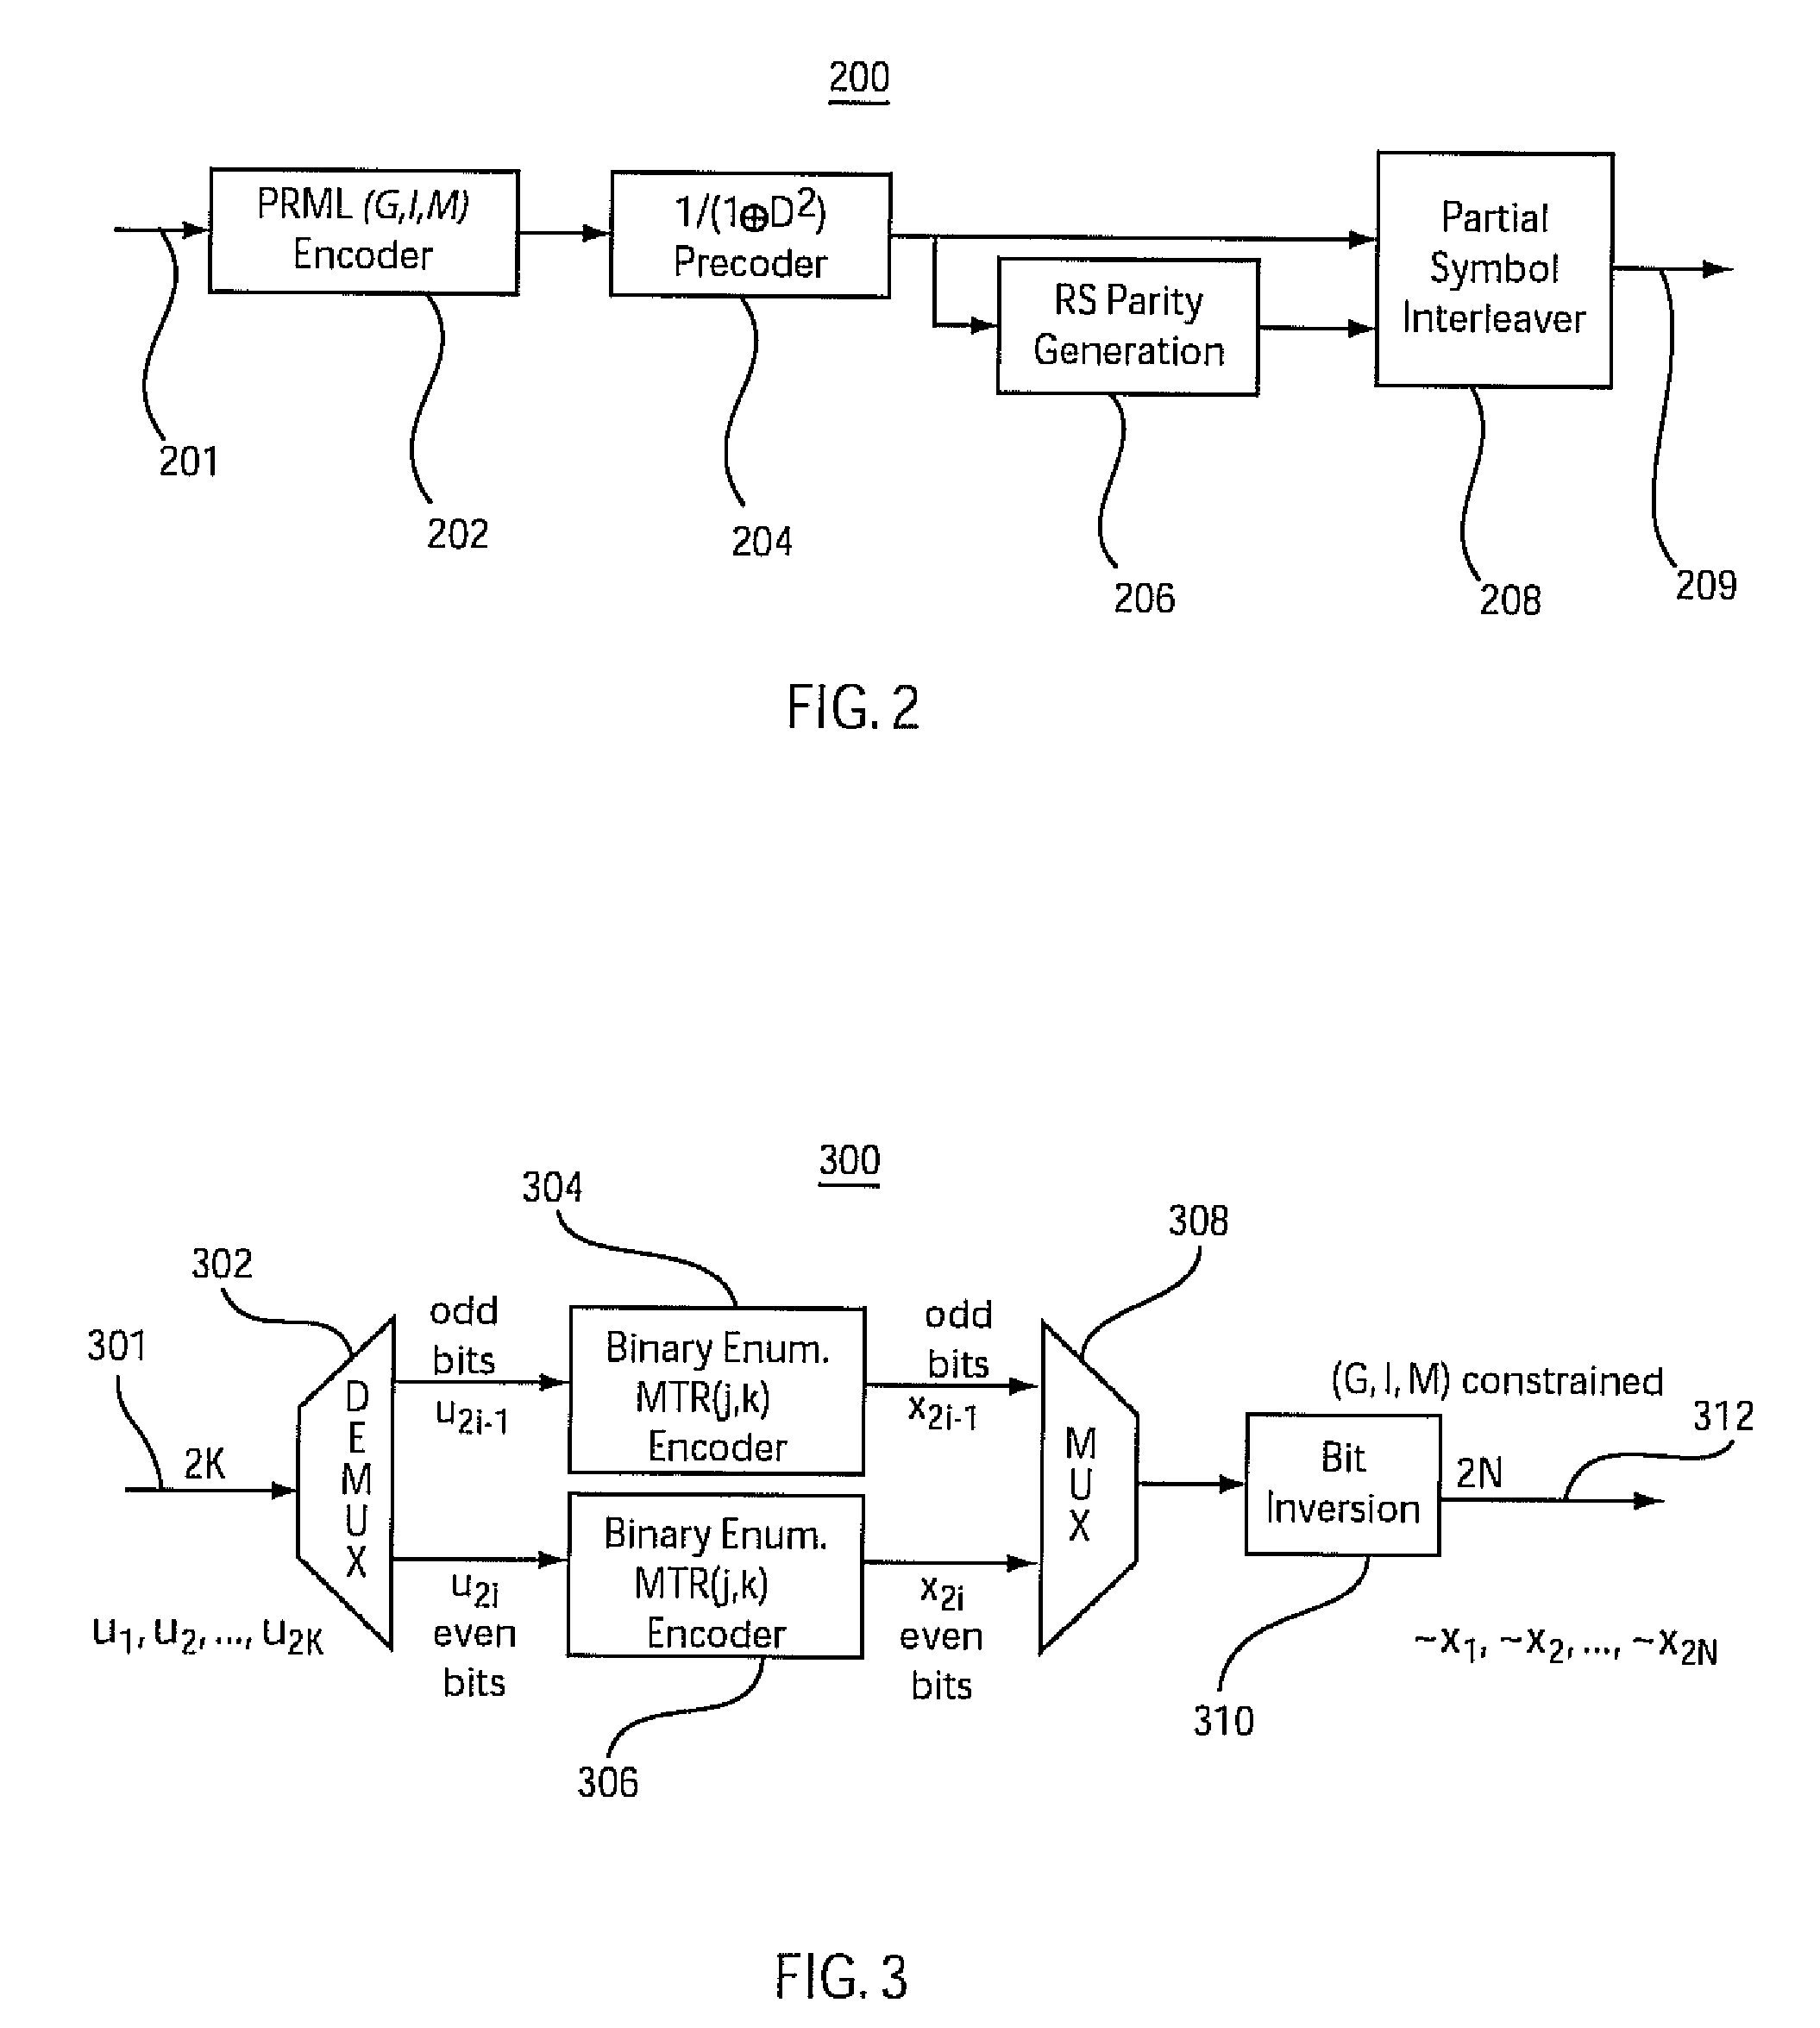 Systems and methods for enumerative encoding and decoding of maximum-transition-run codes and PRML (G,I,M) codes